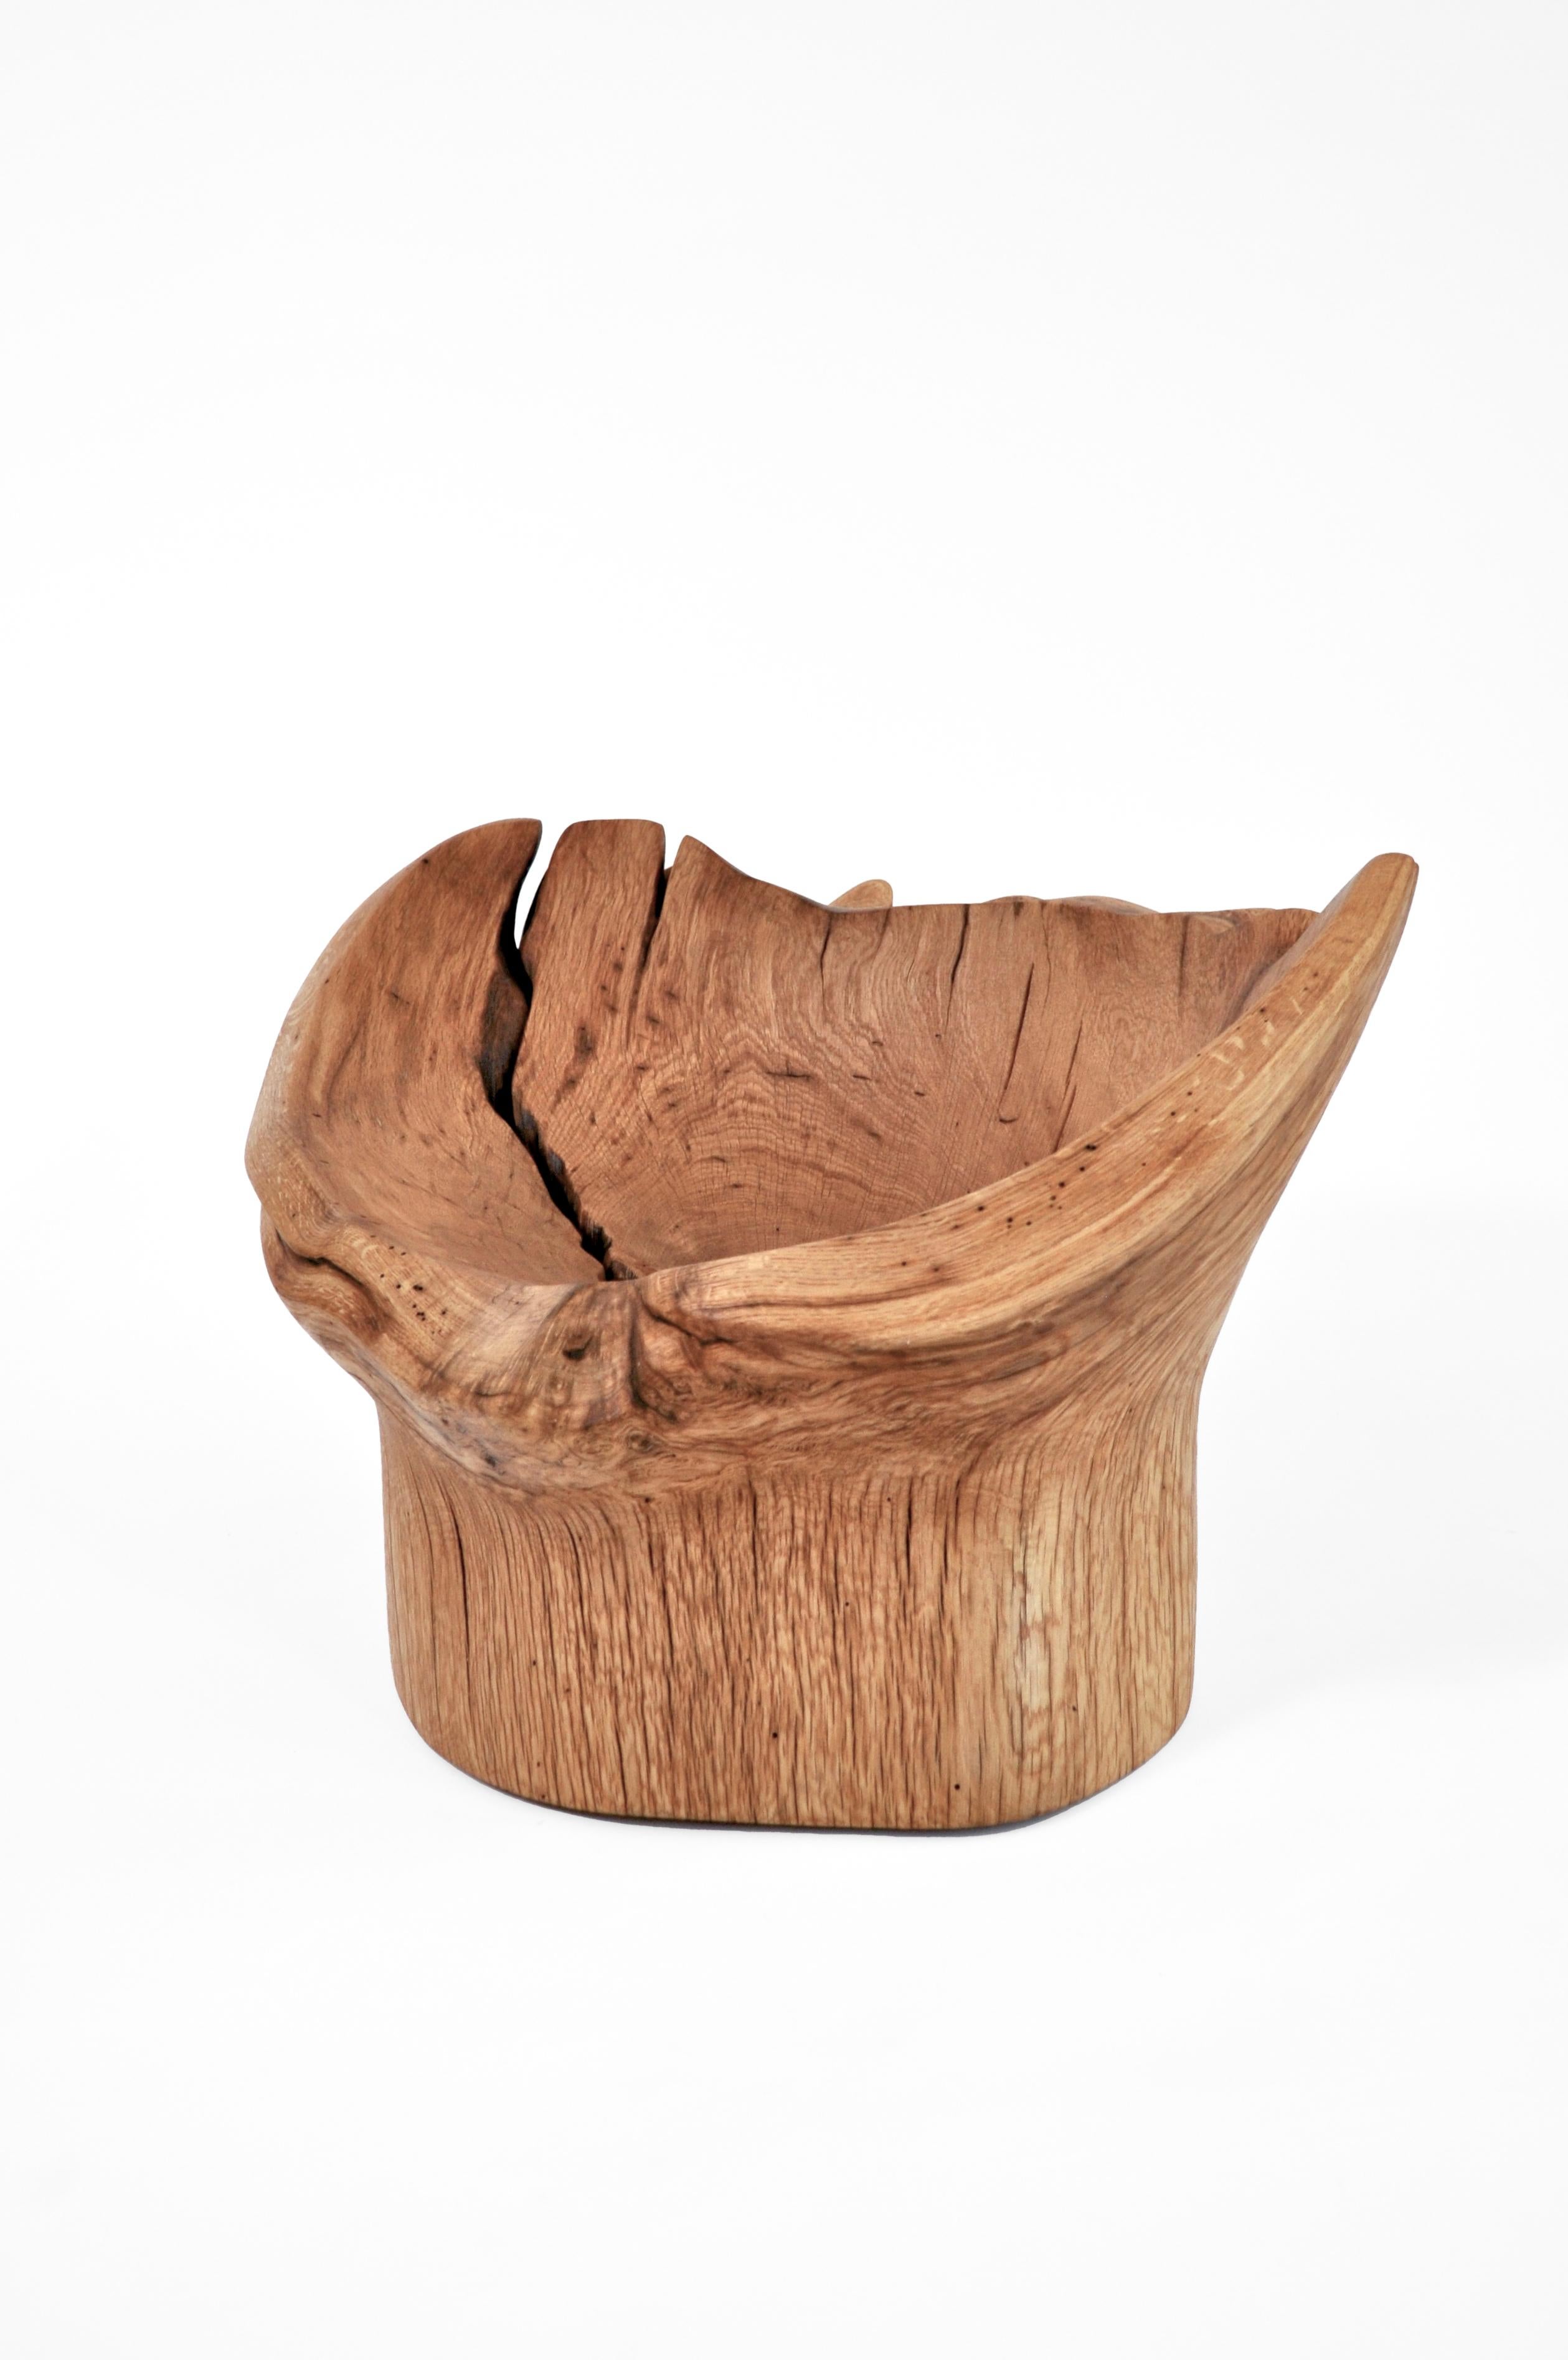 Stool 1244 by Jörg Pietschmann
Dimensions: D 50 x W 60 x H 33 cm 
Materials: oak.
Finish: polished oil finish.


Carved from an oak tree trunk fallen by a windbreak.
In Pietschmann’s sculptures, trees that for centuries were part of a landscape and